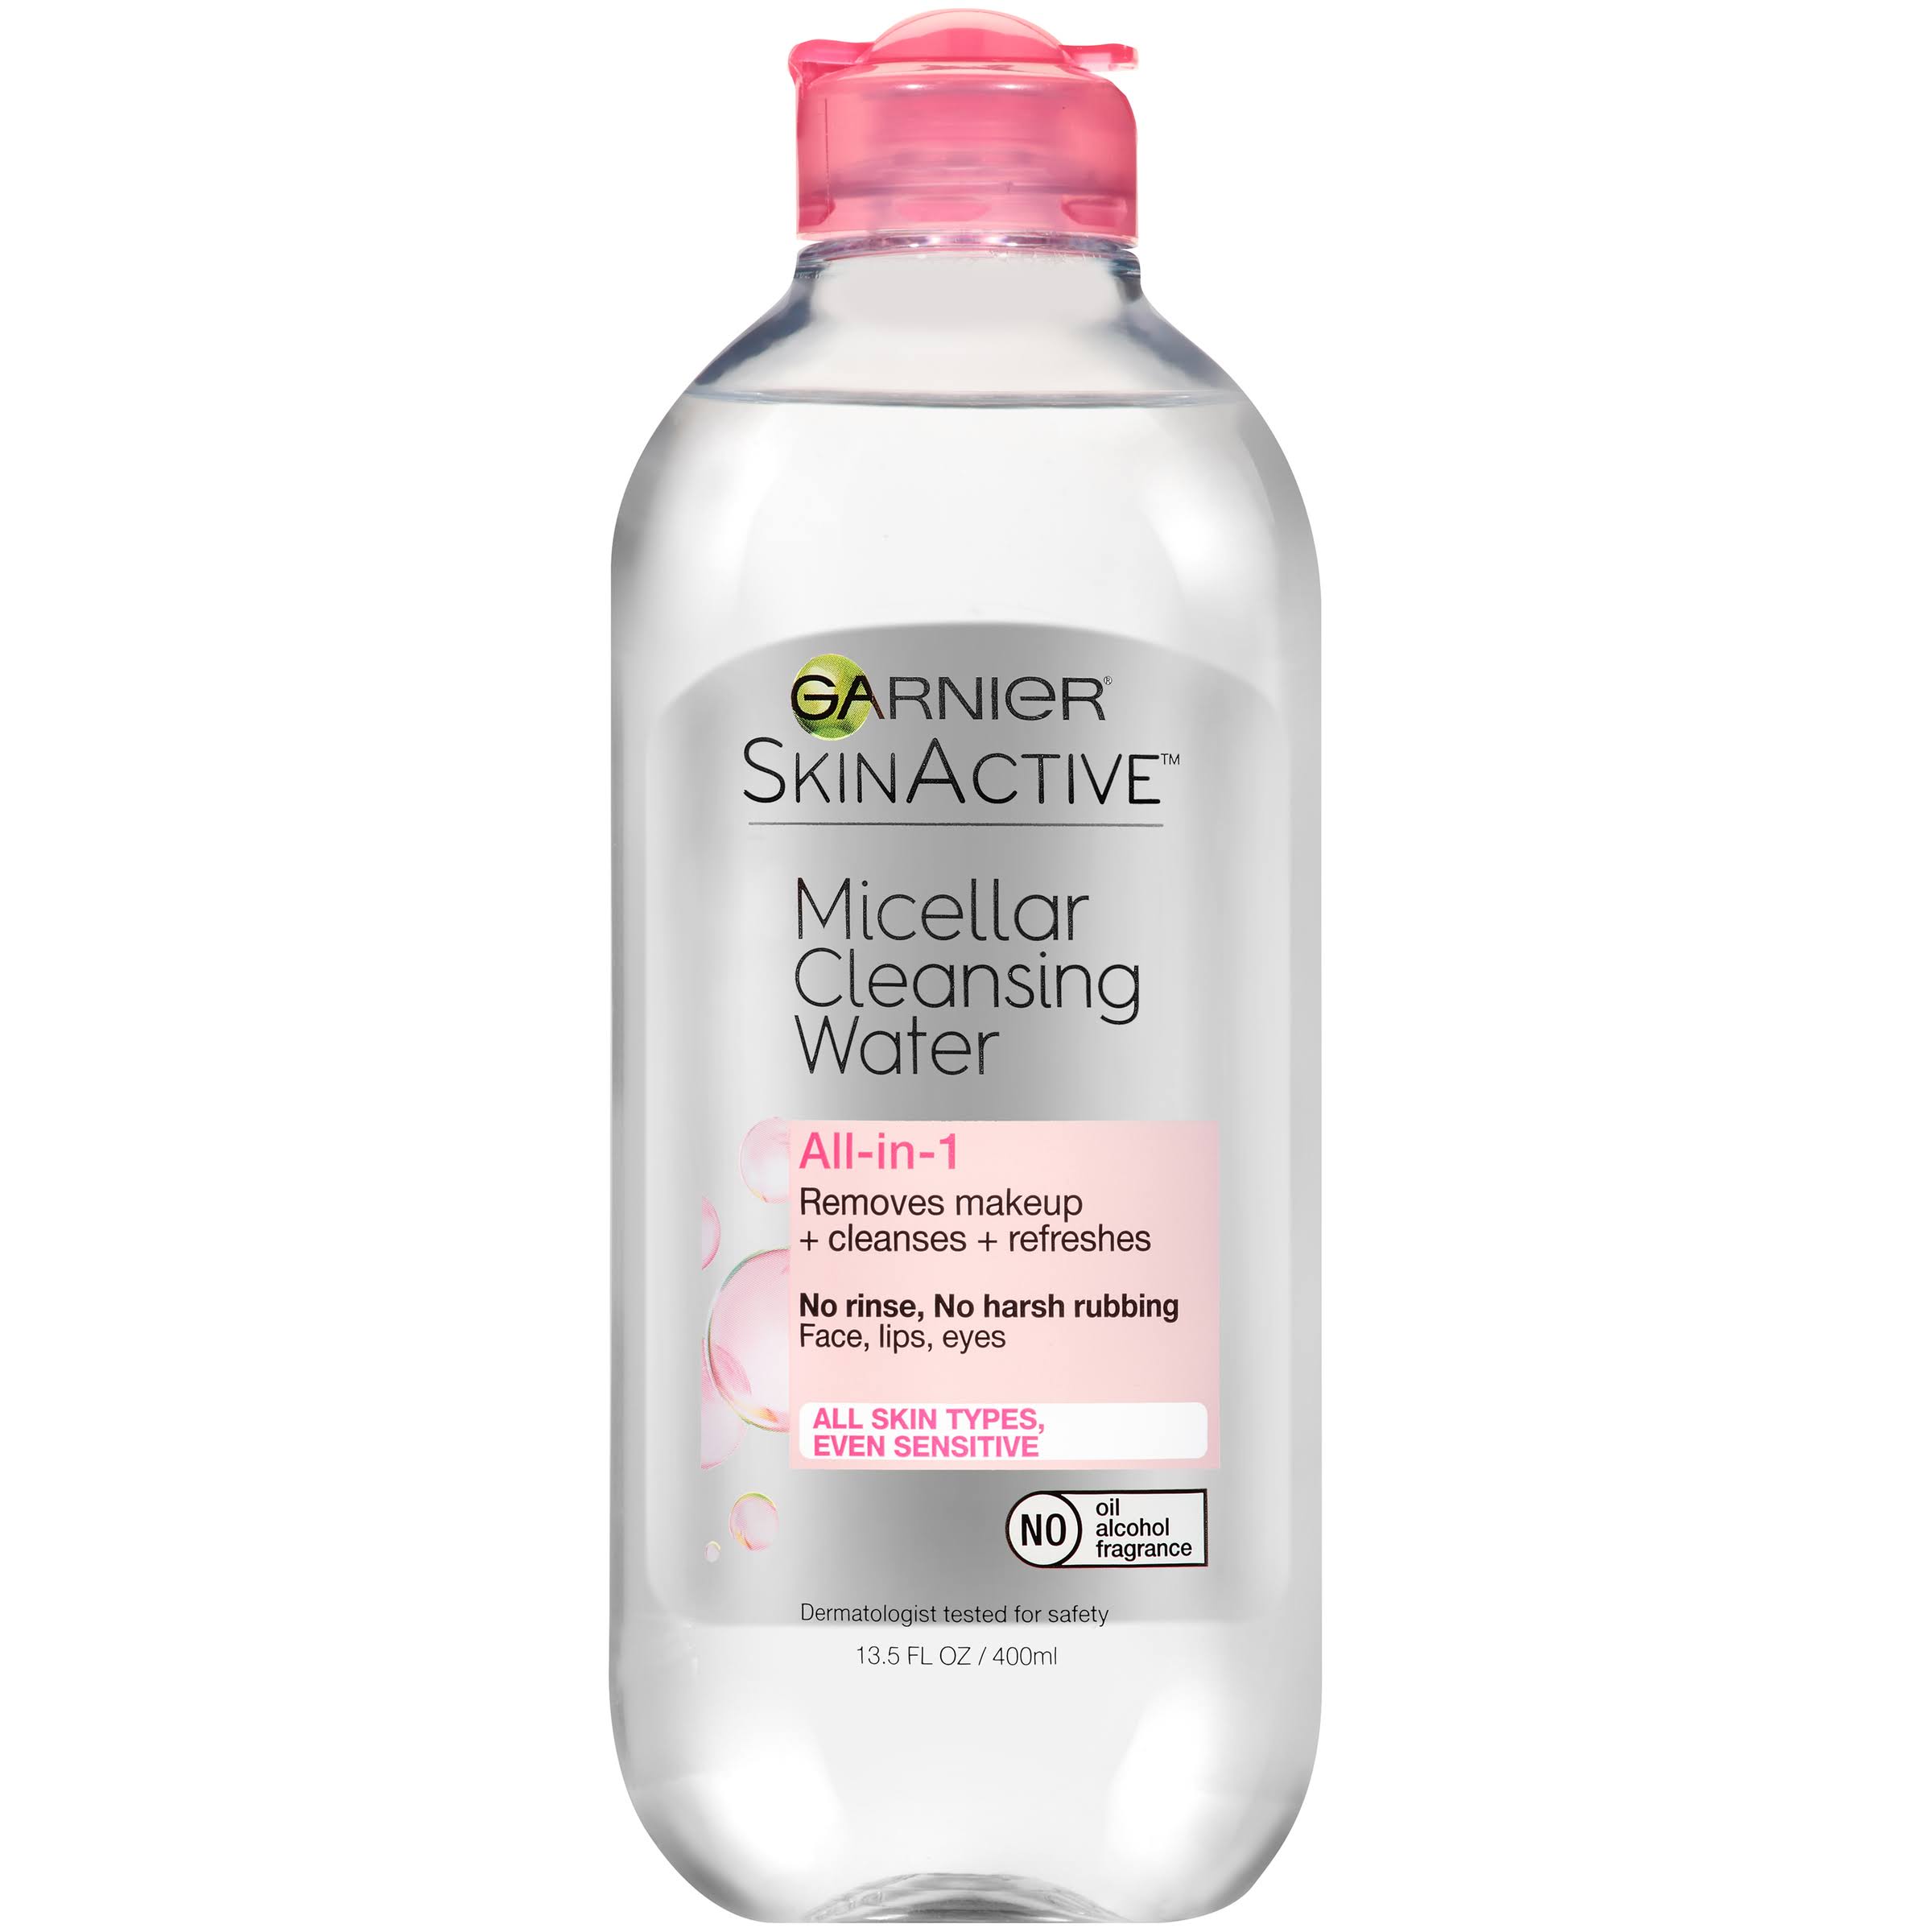 Garnier Skin Active Micellar Cleansing Water All In 1 Cleanser And Makeup Remover - 13.5 fl oz